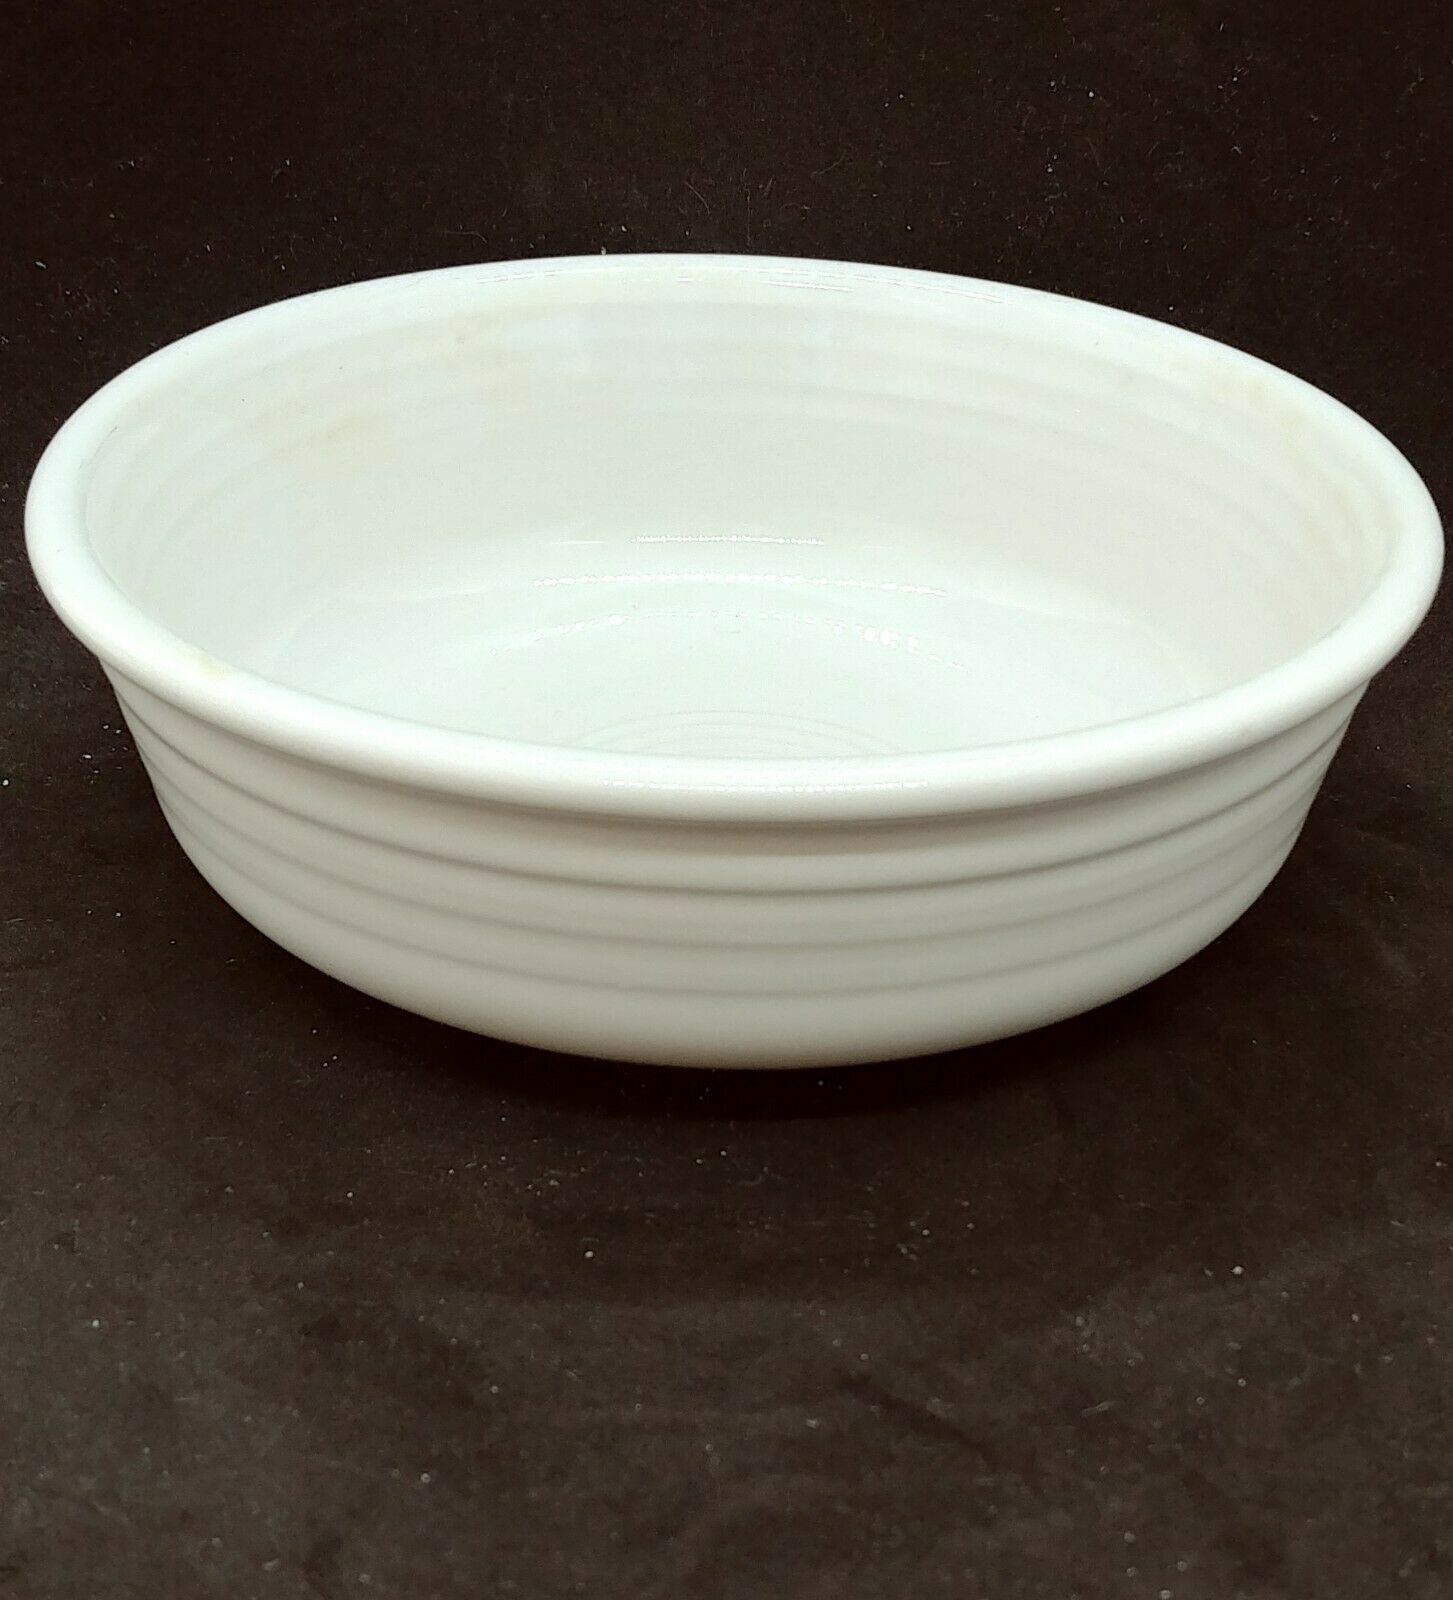 Fiesta Ware White Cereal Fruit Salad Bowl 5.5" 6 Ounce